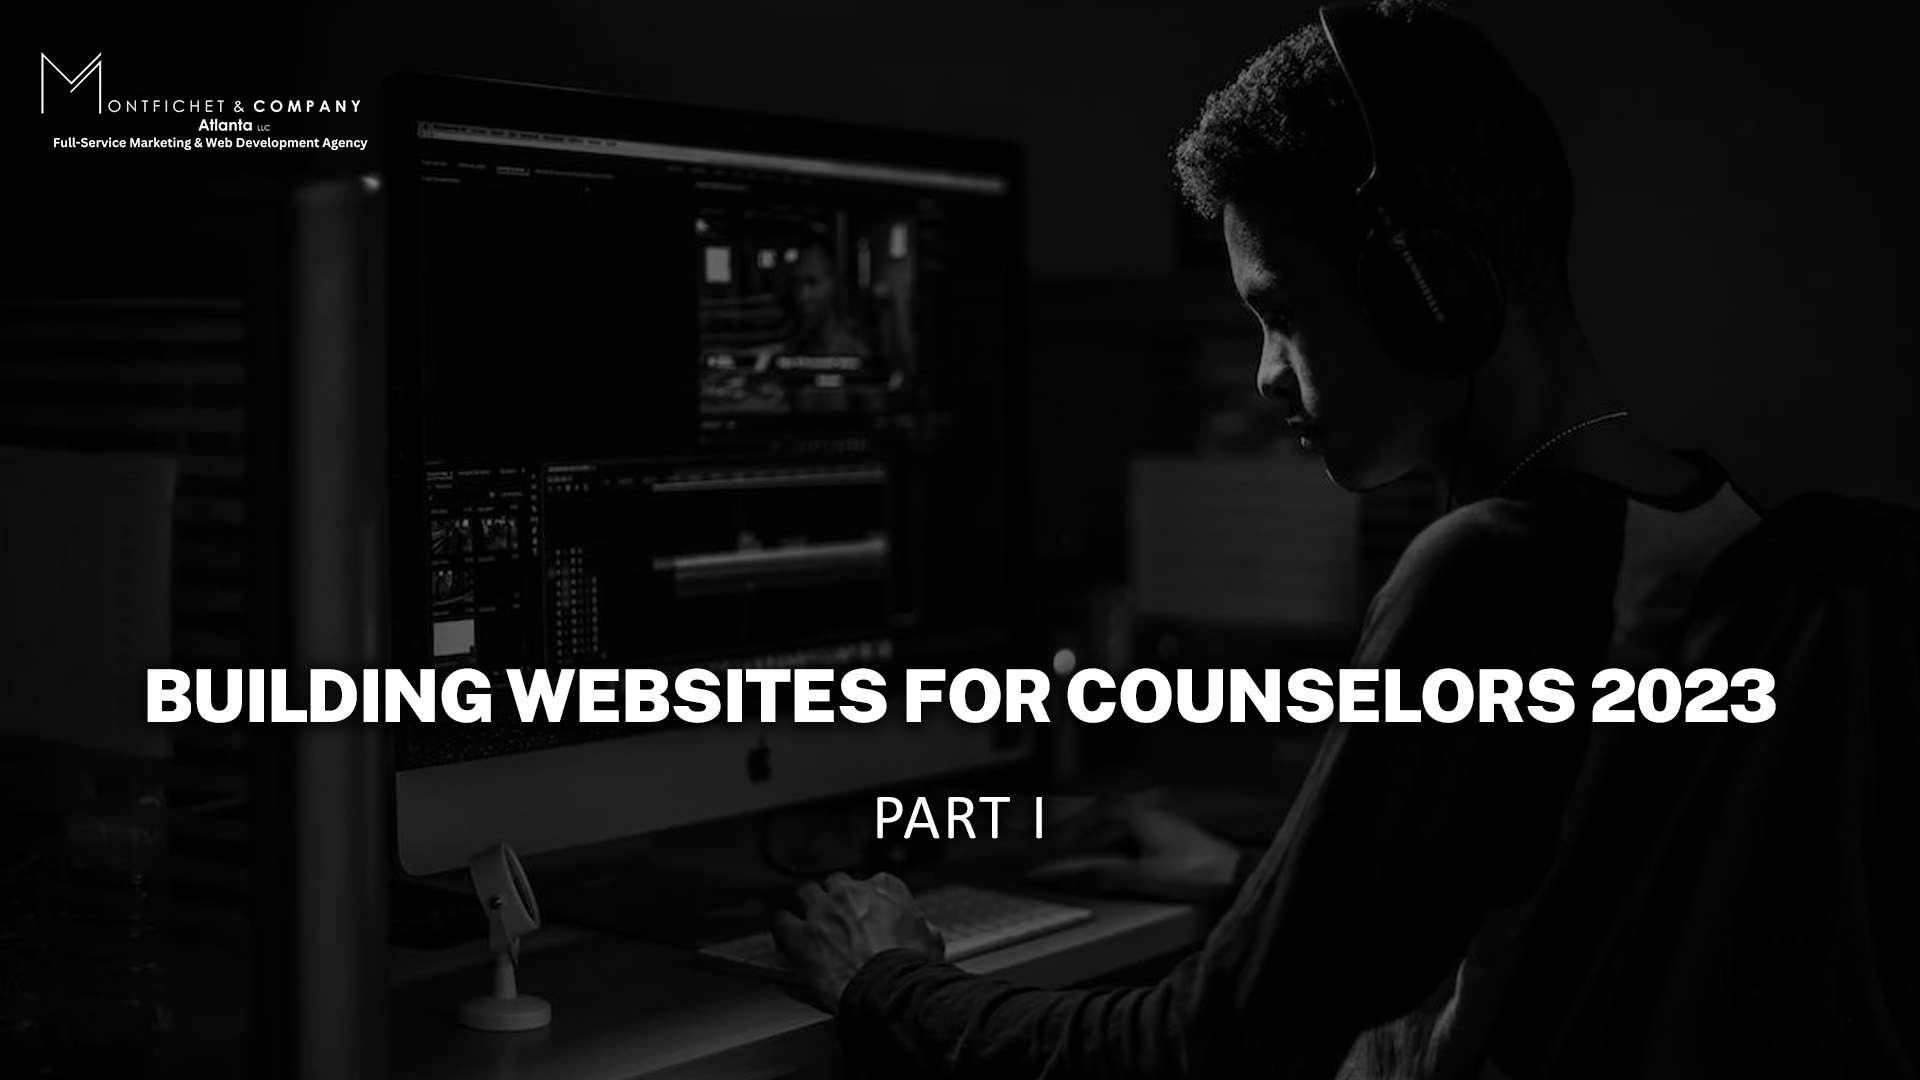 Accurately Building Websites for Counselors 2023 Part I